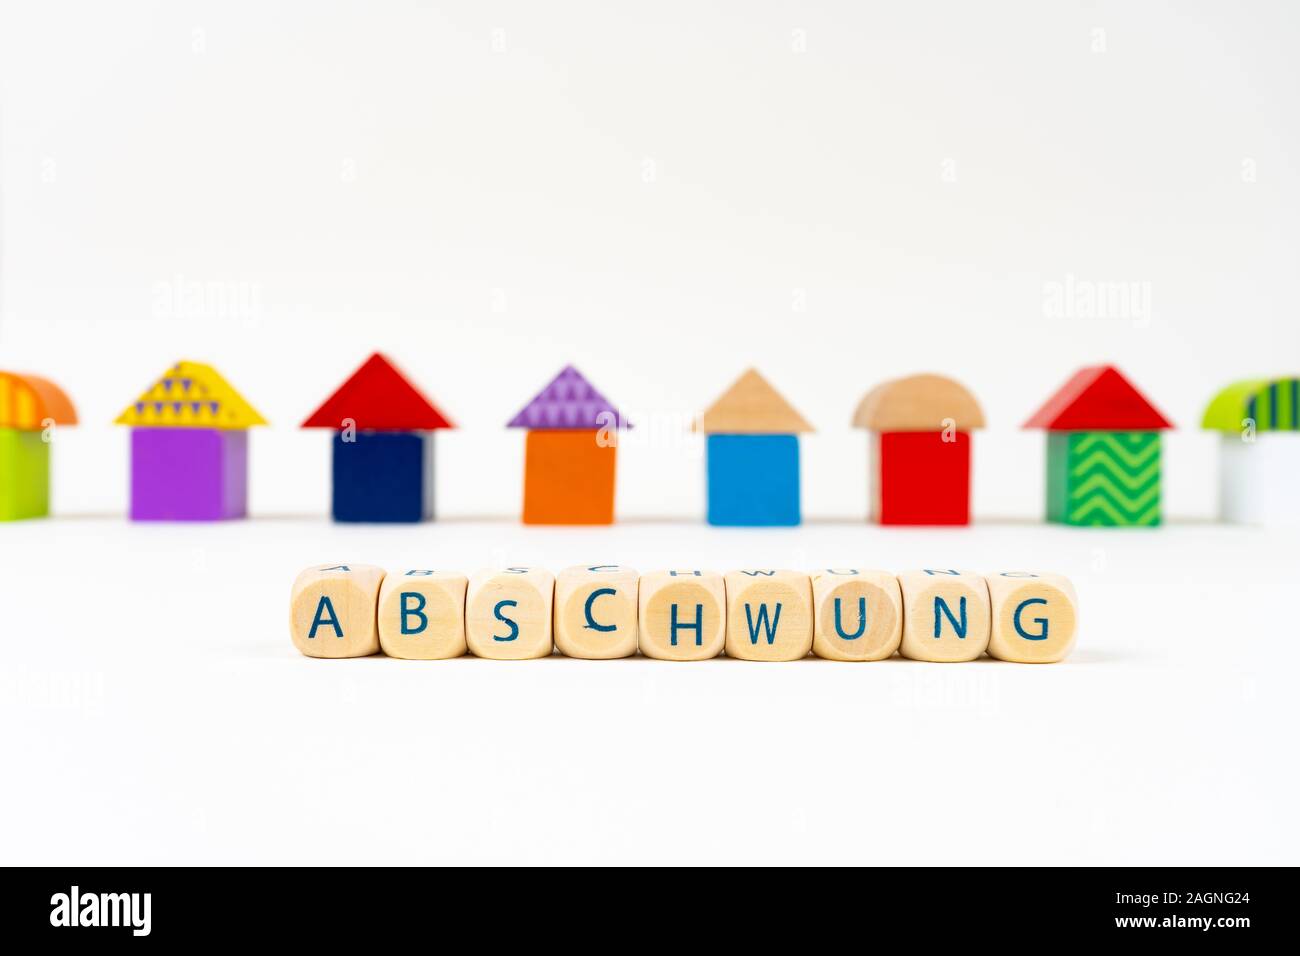 Wooden block with letters saying 'Abschwung' (German for recession) in front of colorful toy houses Stock Photo